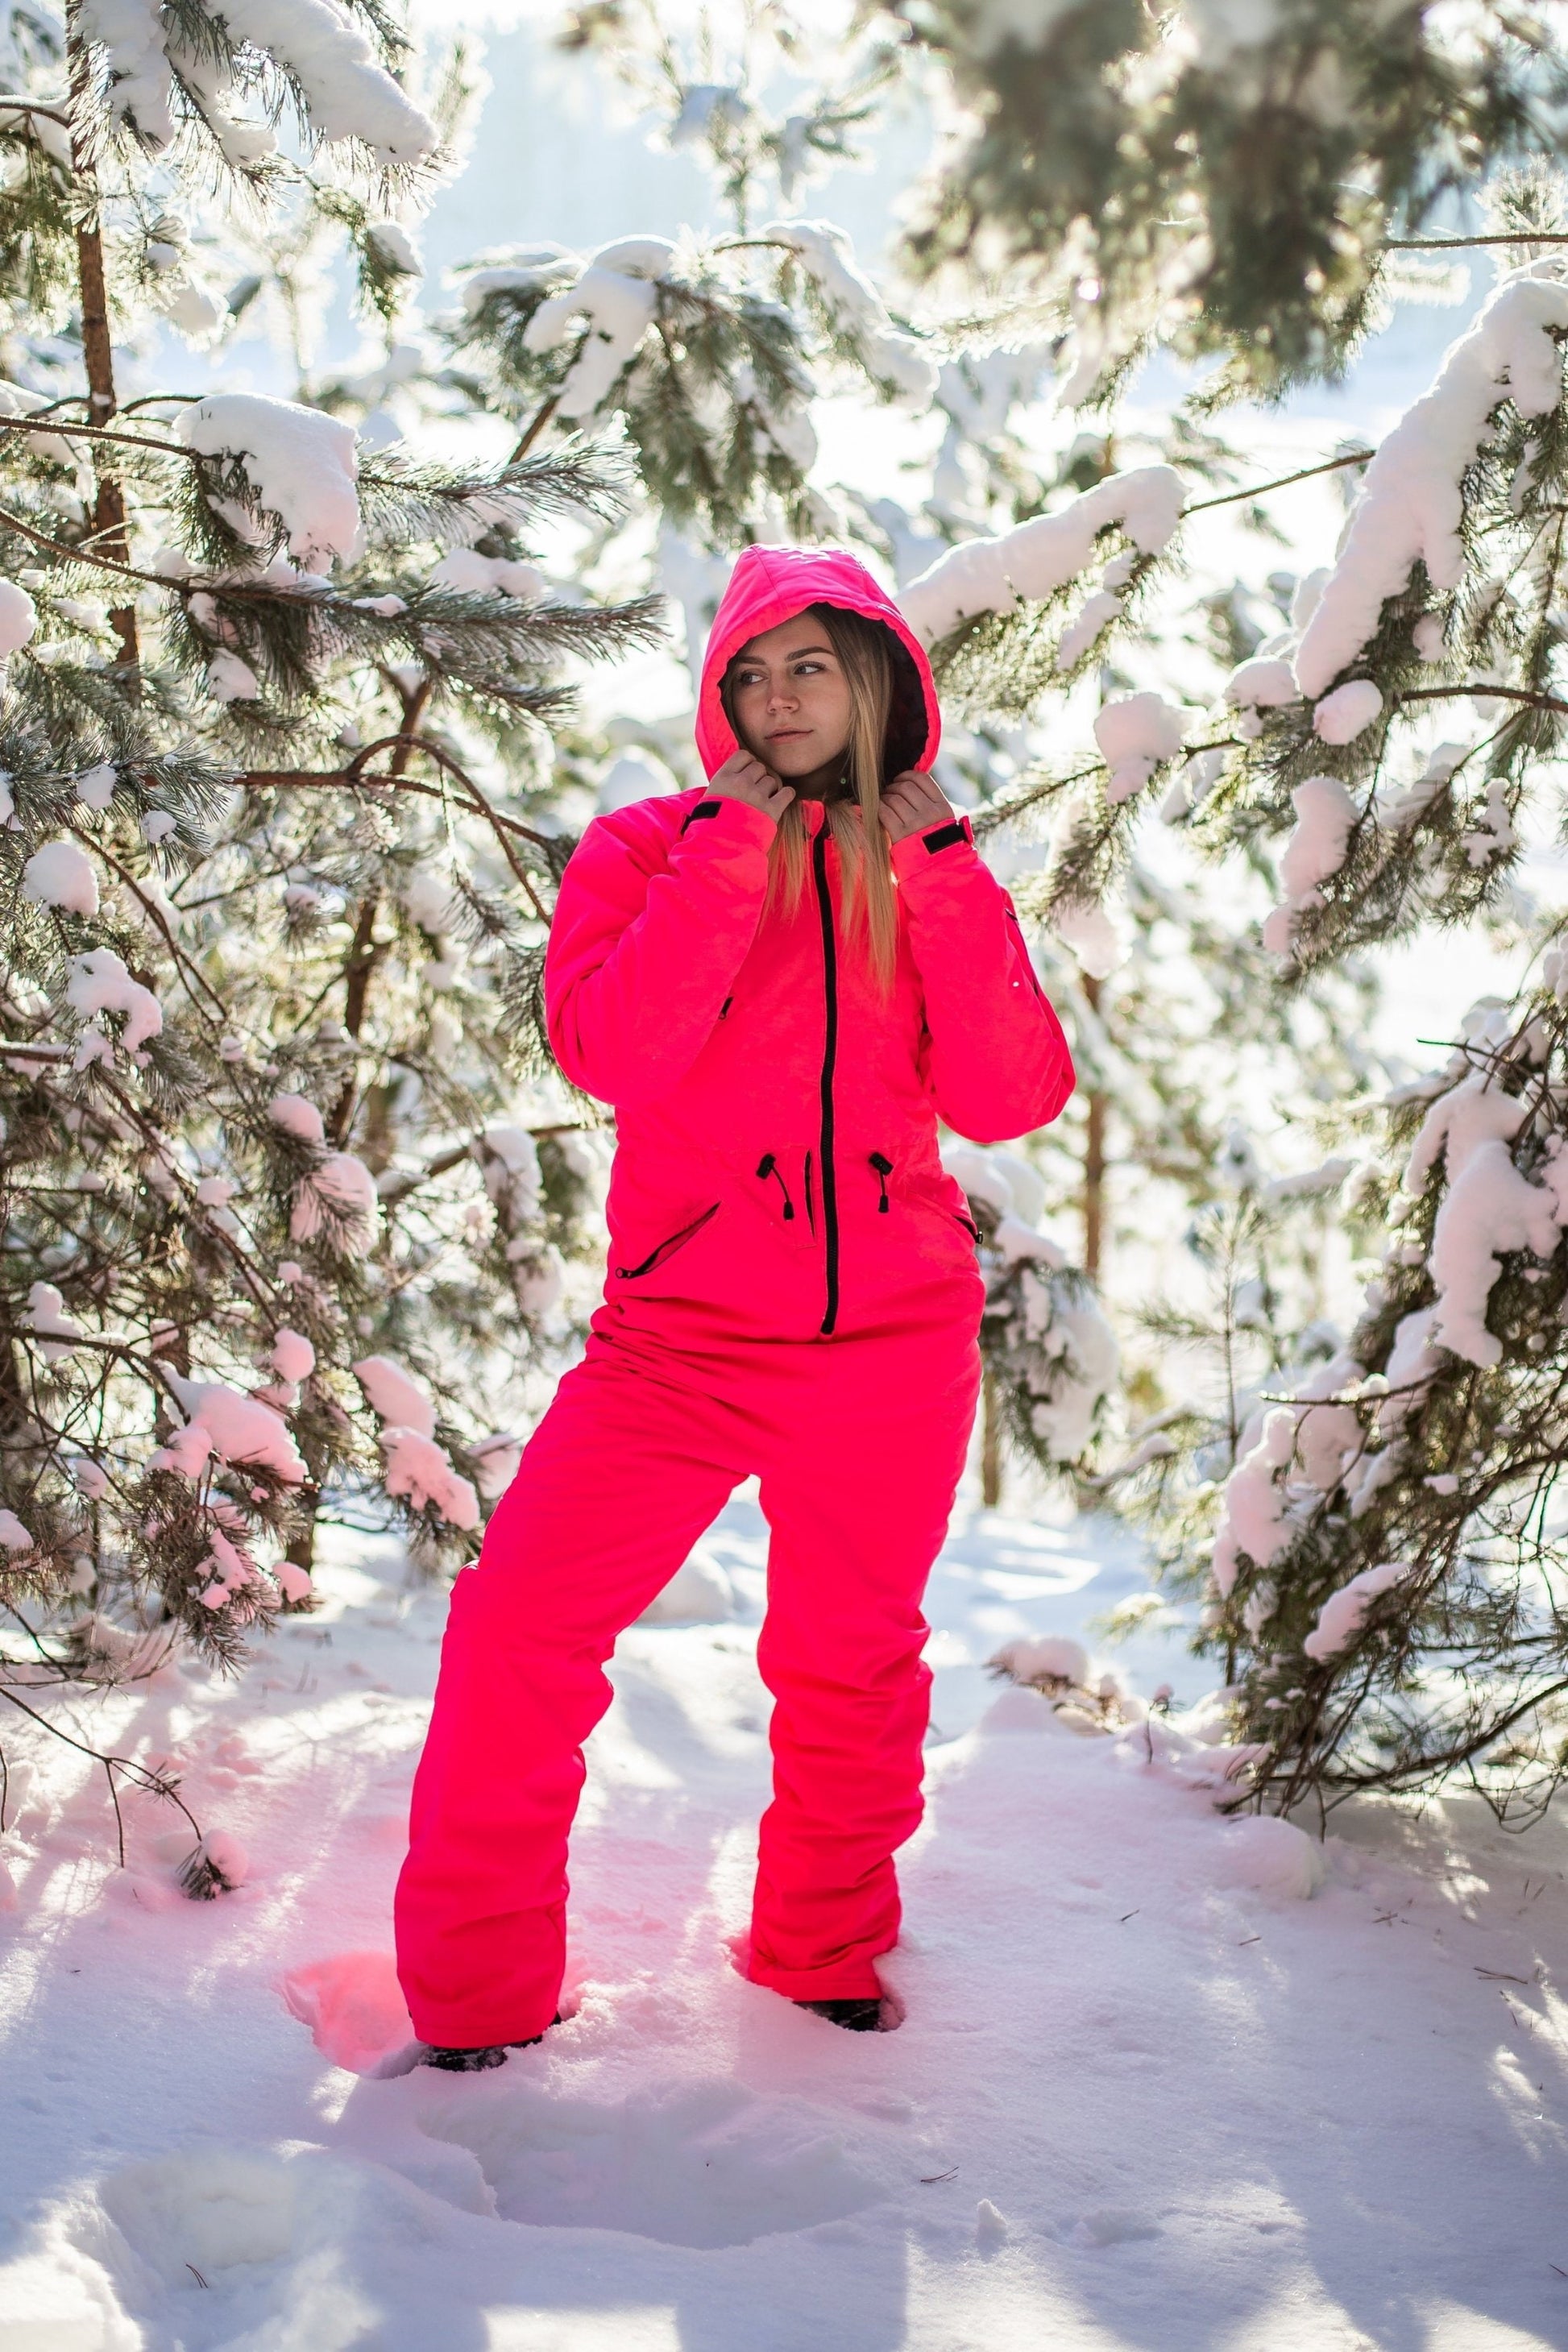 Neon Pink Winter Ski Jumpsuit, Snowboard Clothes, Snowboard suit, Skiing Overall, Ski Suit Women, Jumpsuit winter, Colorful Onesie